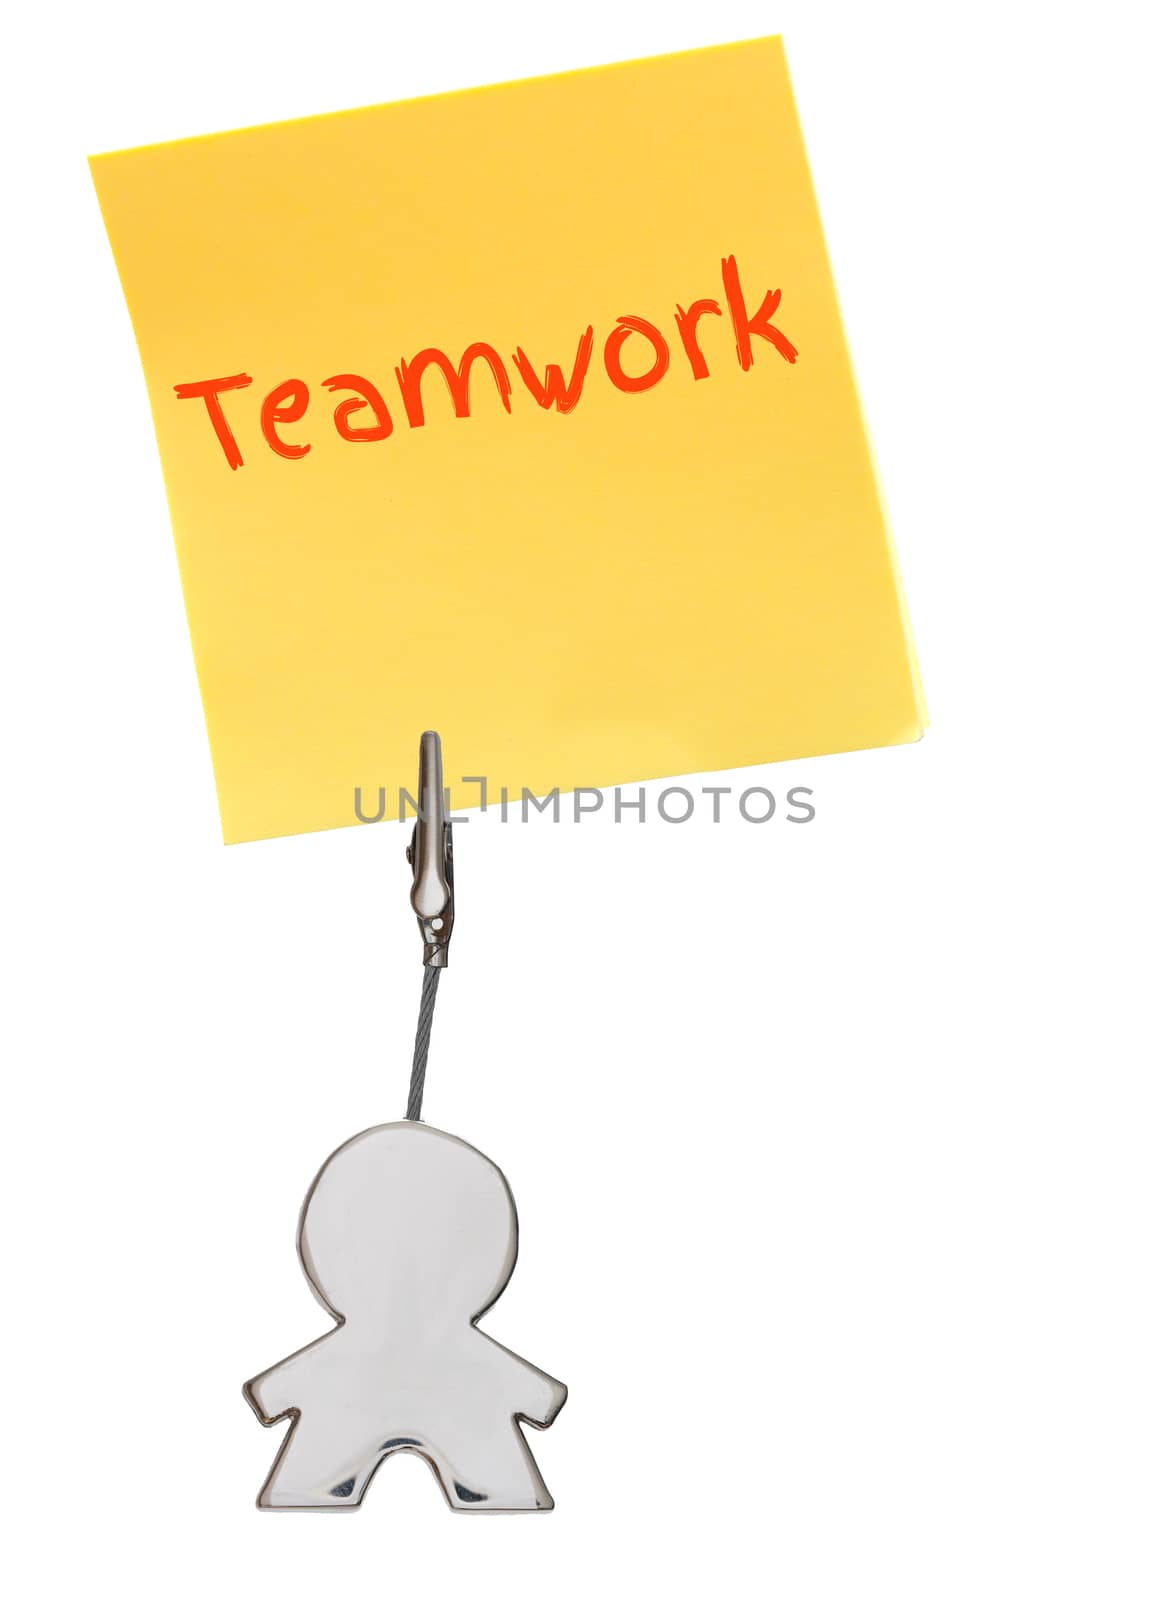 Orange sticker, paper note isolated on white, held by busines card holder figure, business concept, teamwork